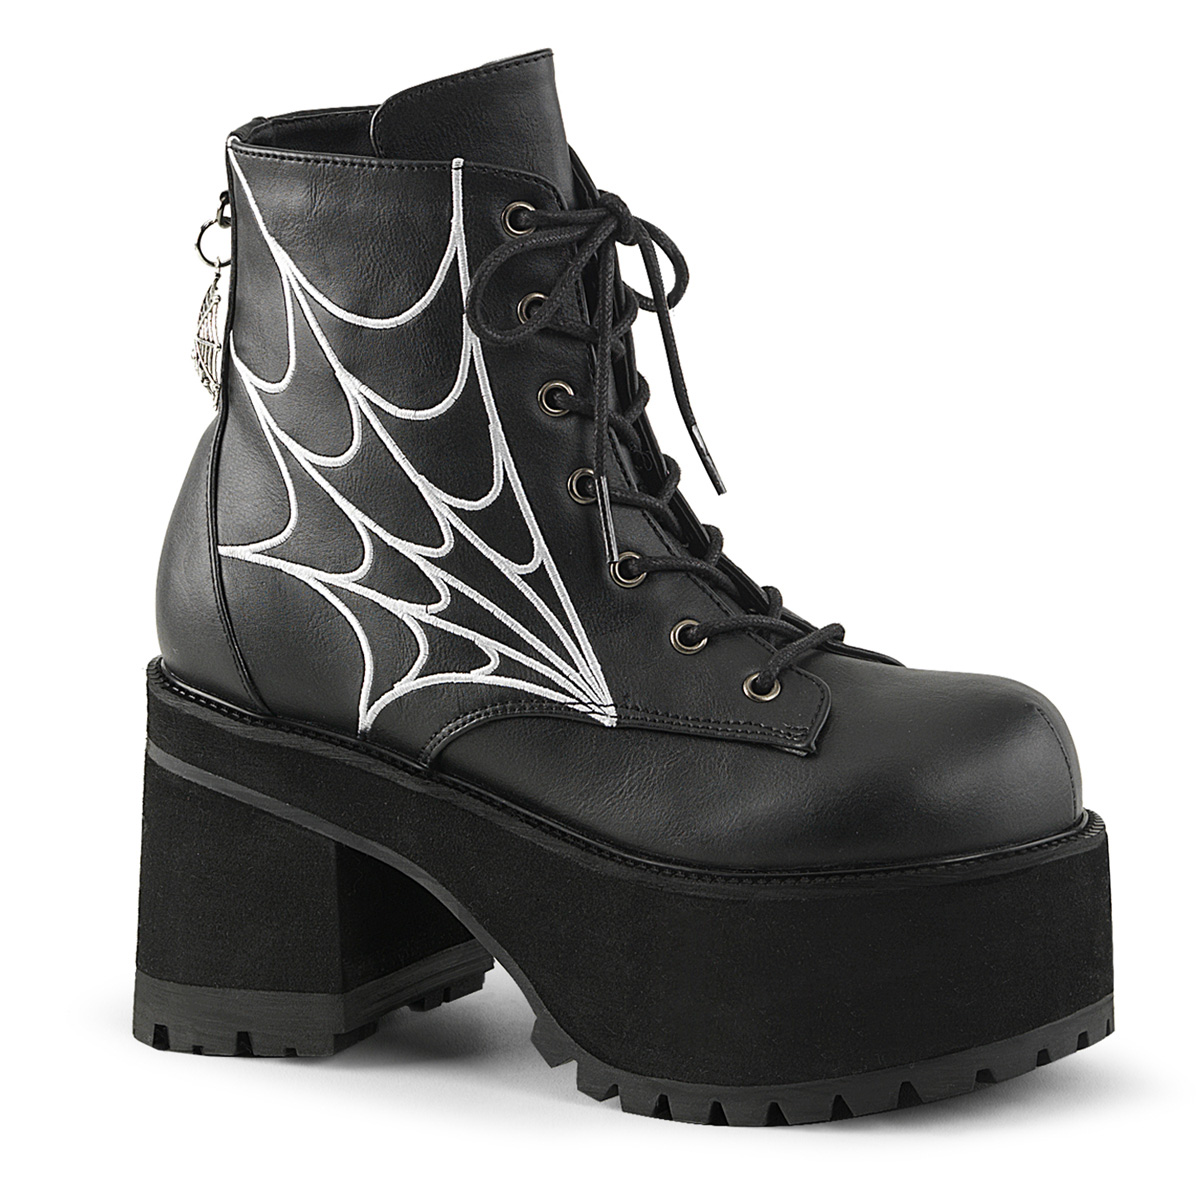 Ranger-105 Black Ankle Boot with Spider Web